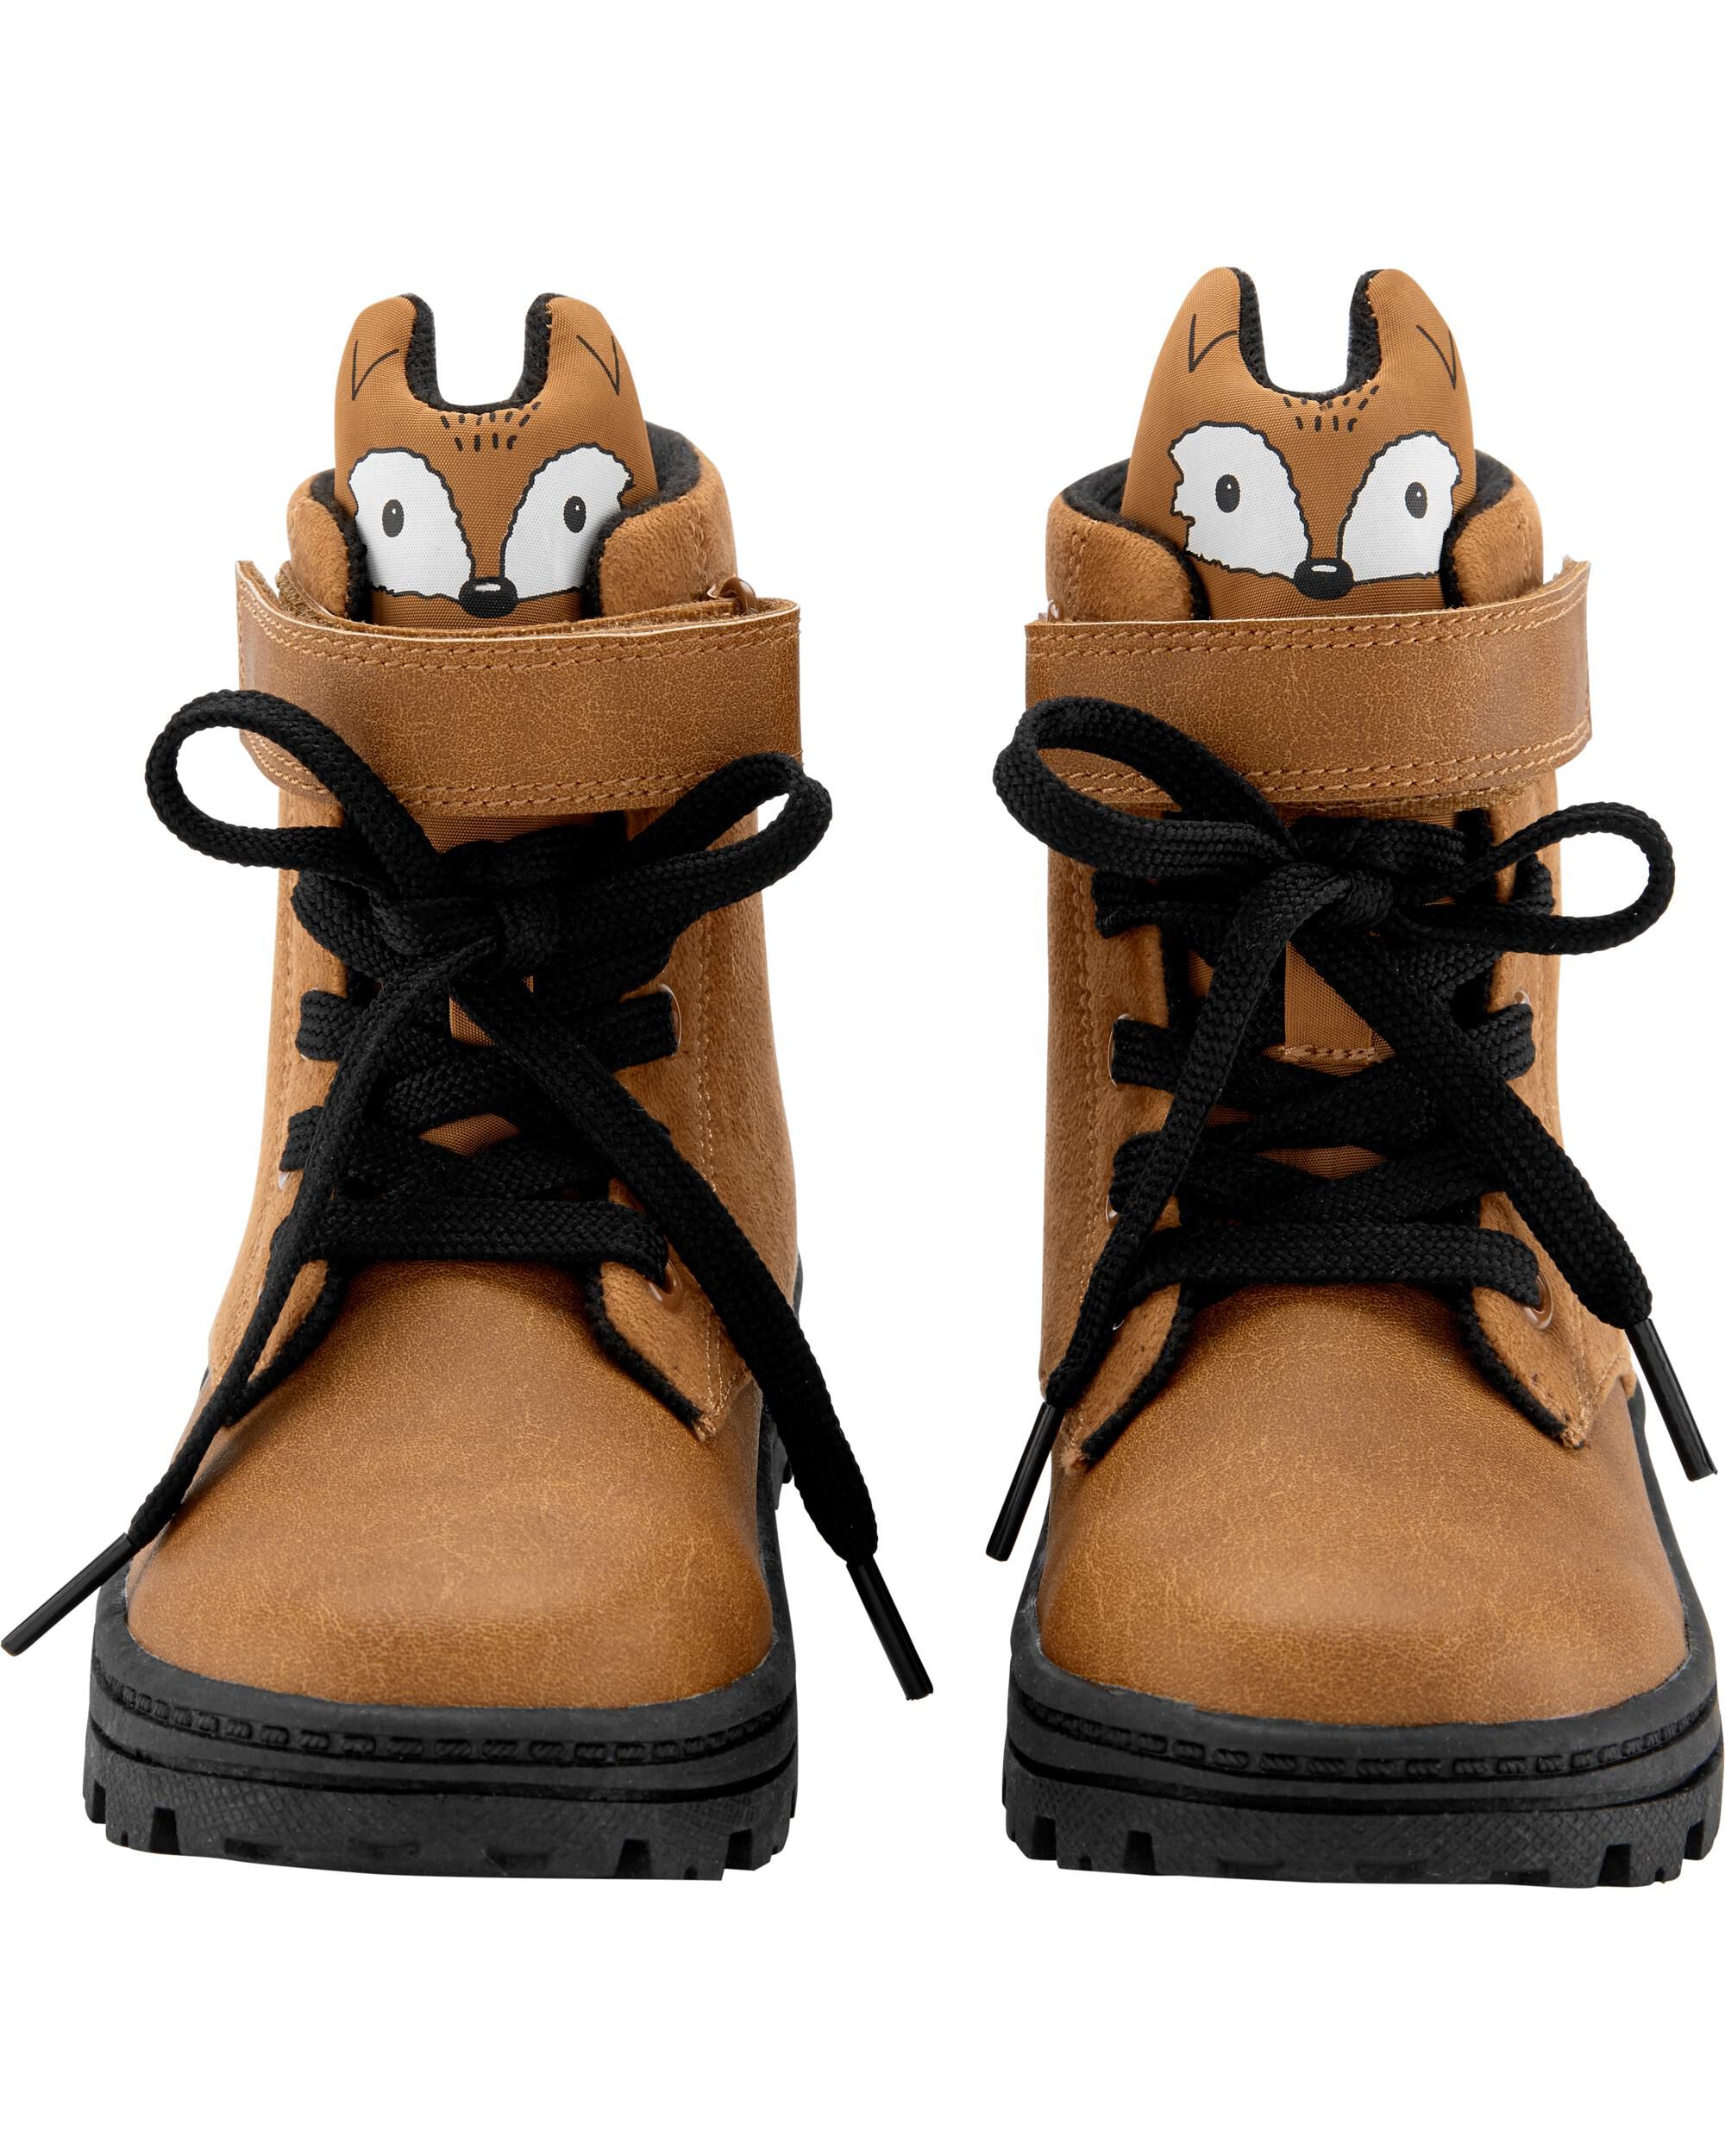 carters boots